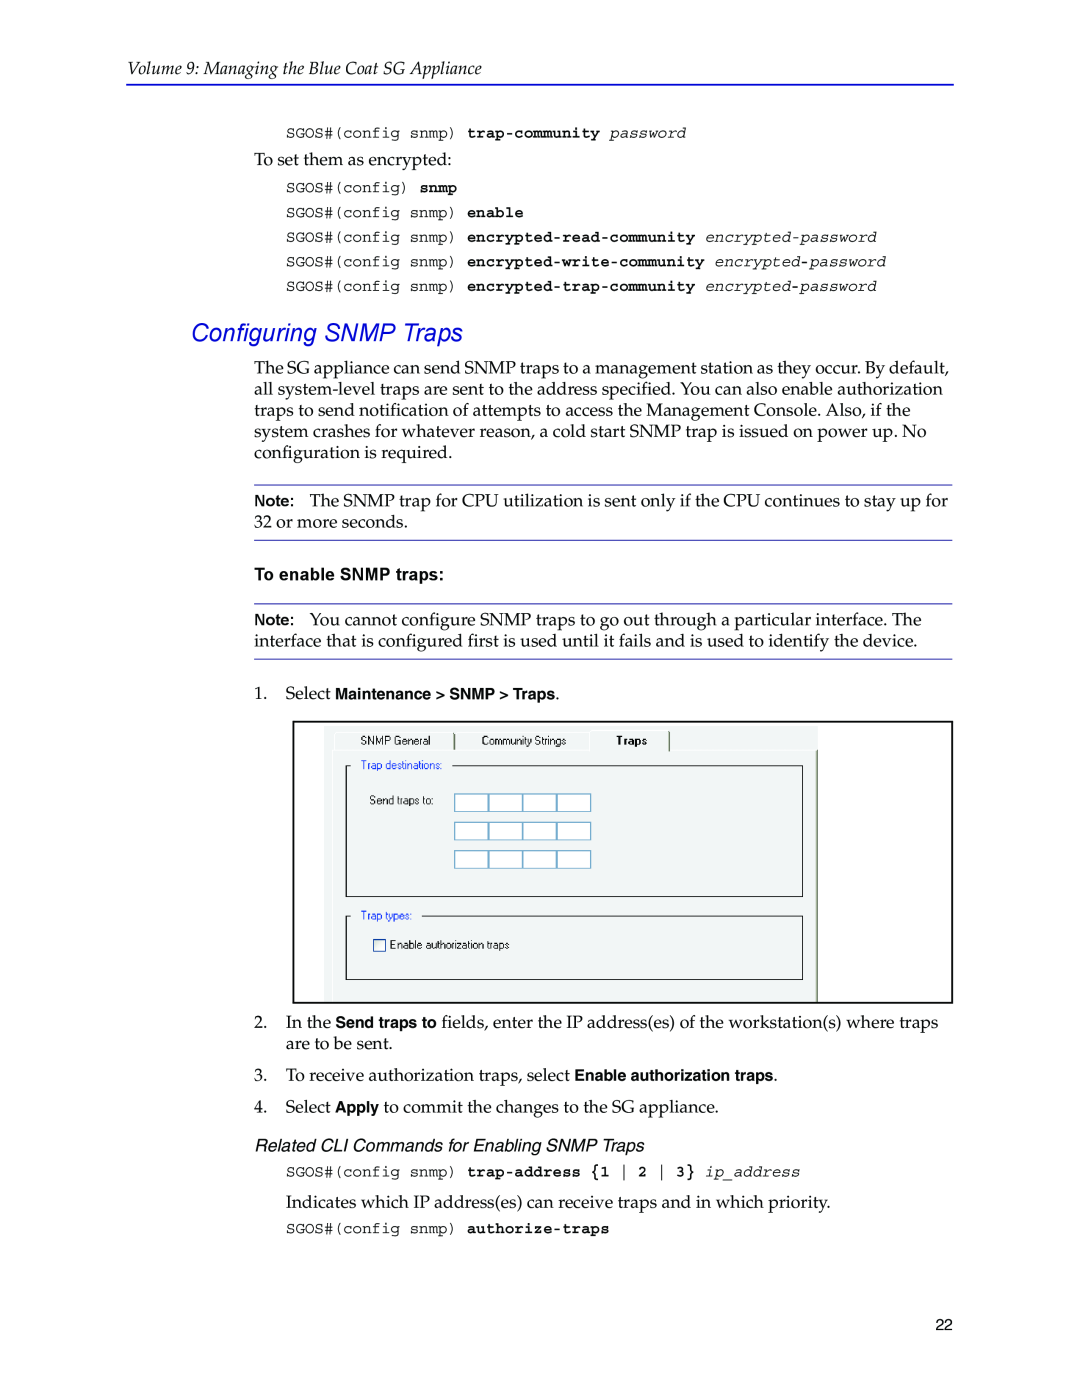 Blue Coat Systems SGOS Version 5.2.2, Blue Coat Systems SG Appliance manual Configuring SNMP Traps, To enable SNMP traps 